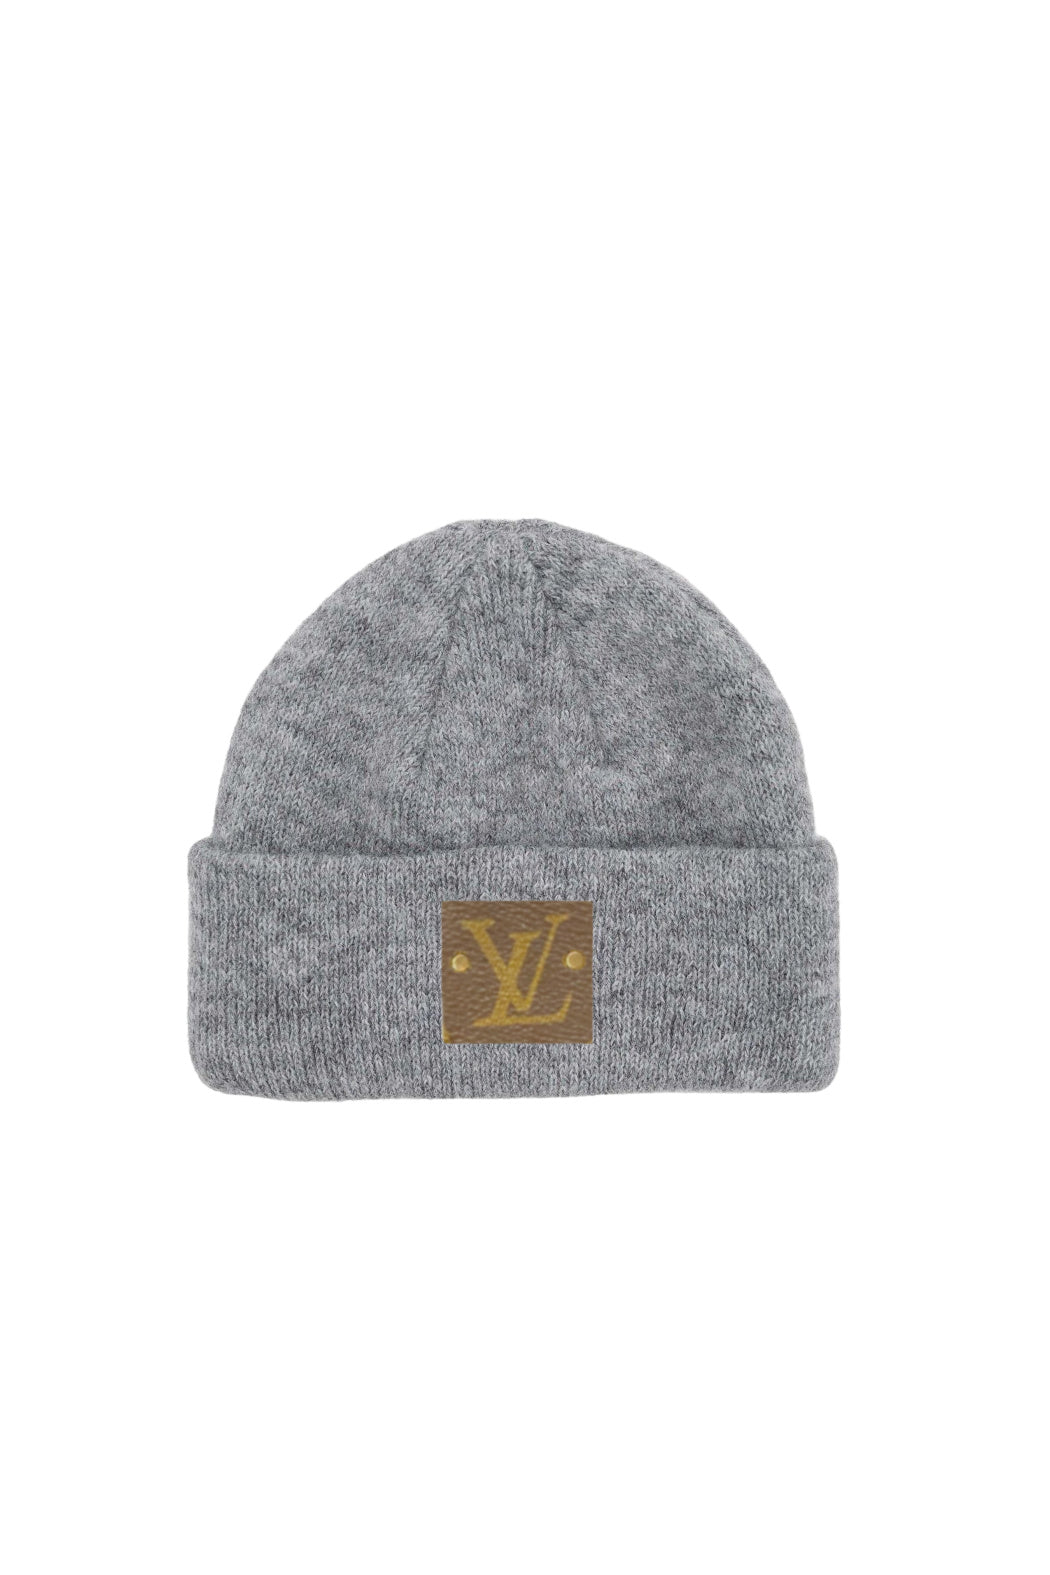 Upcycled LV Classic Baby Beanie